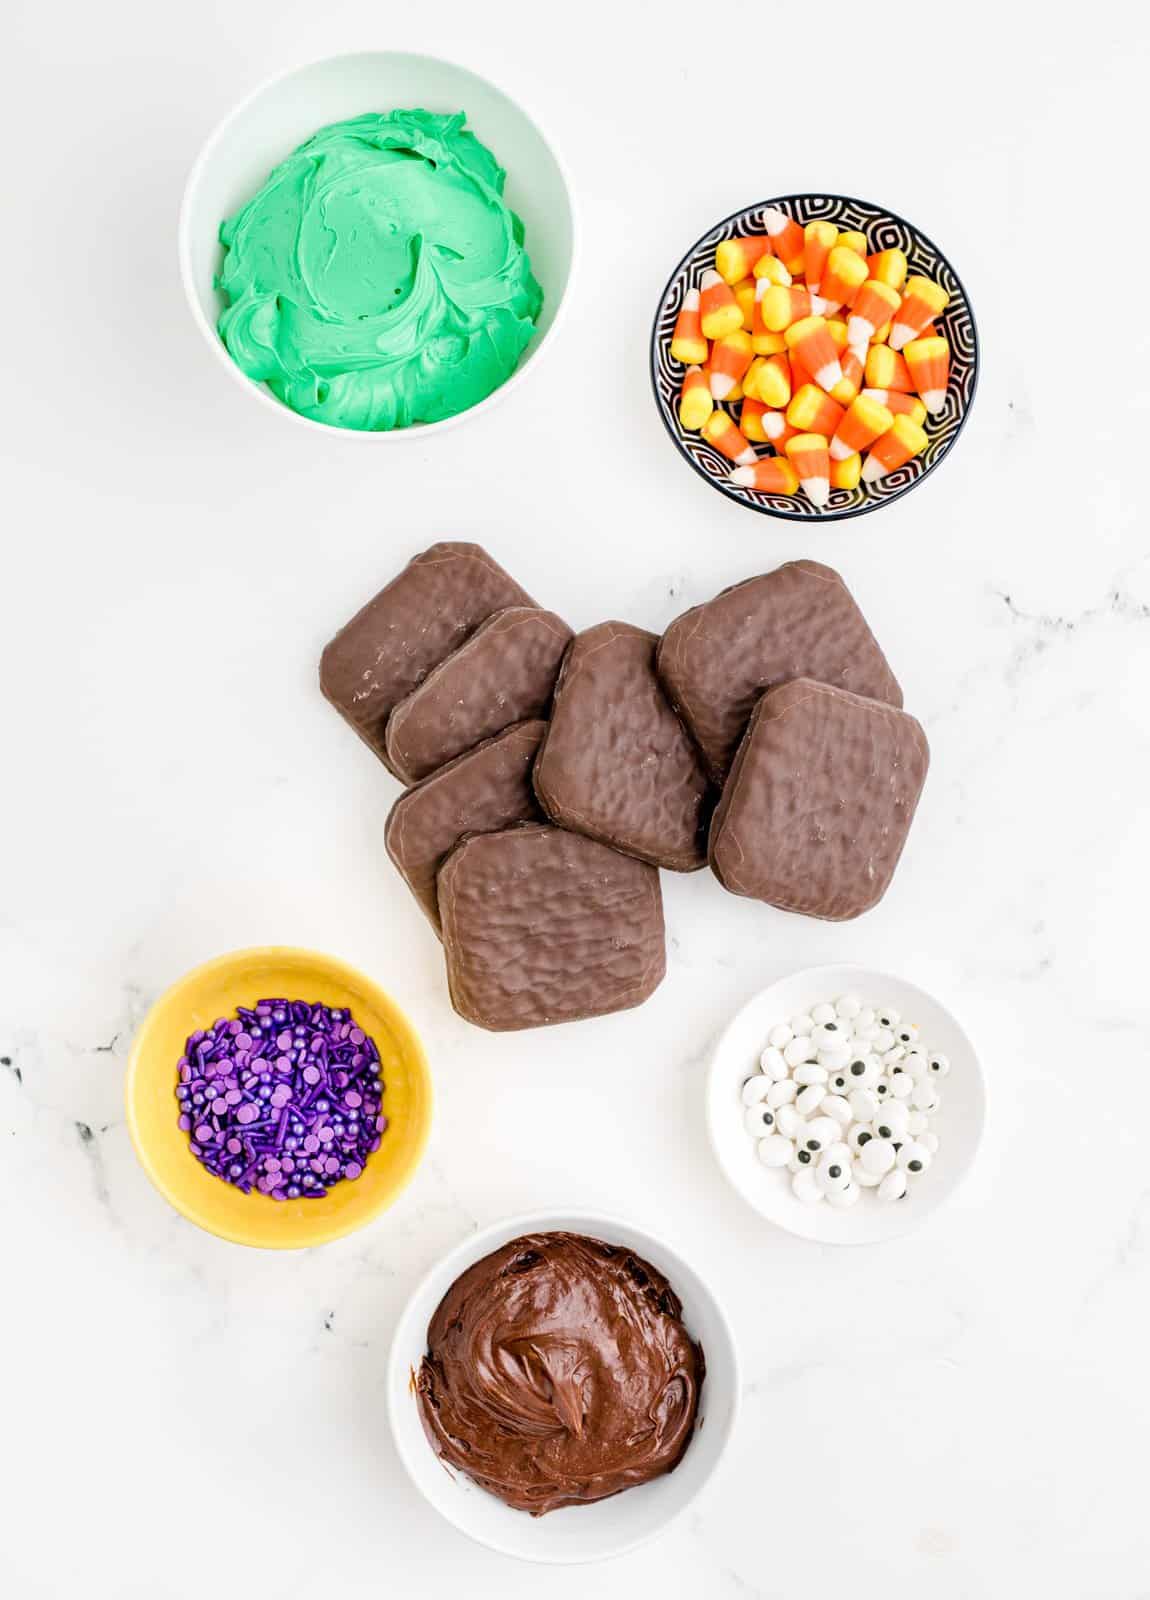 Ingredients needed: covered graham cracker cookies, green frosting, chocolate frosting, candy eyeballs (assortment of small and large), purple sprinkles and candy corn.